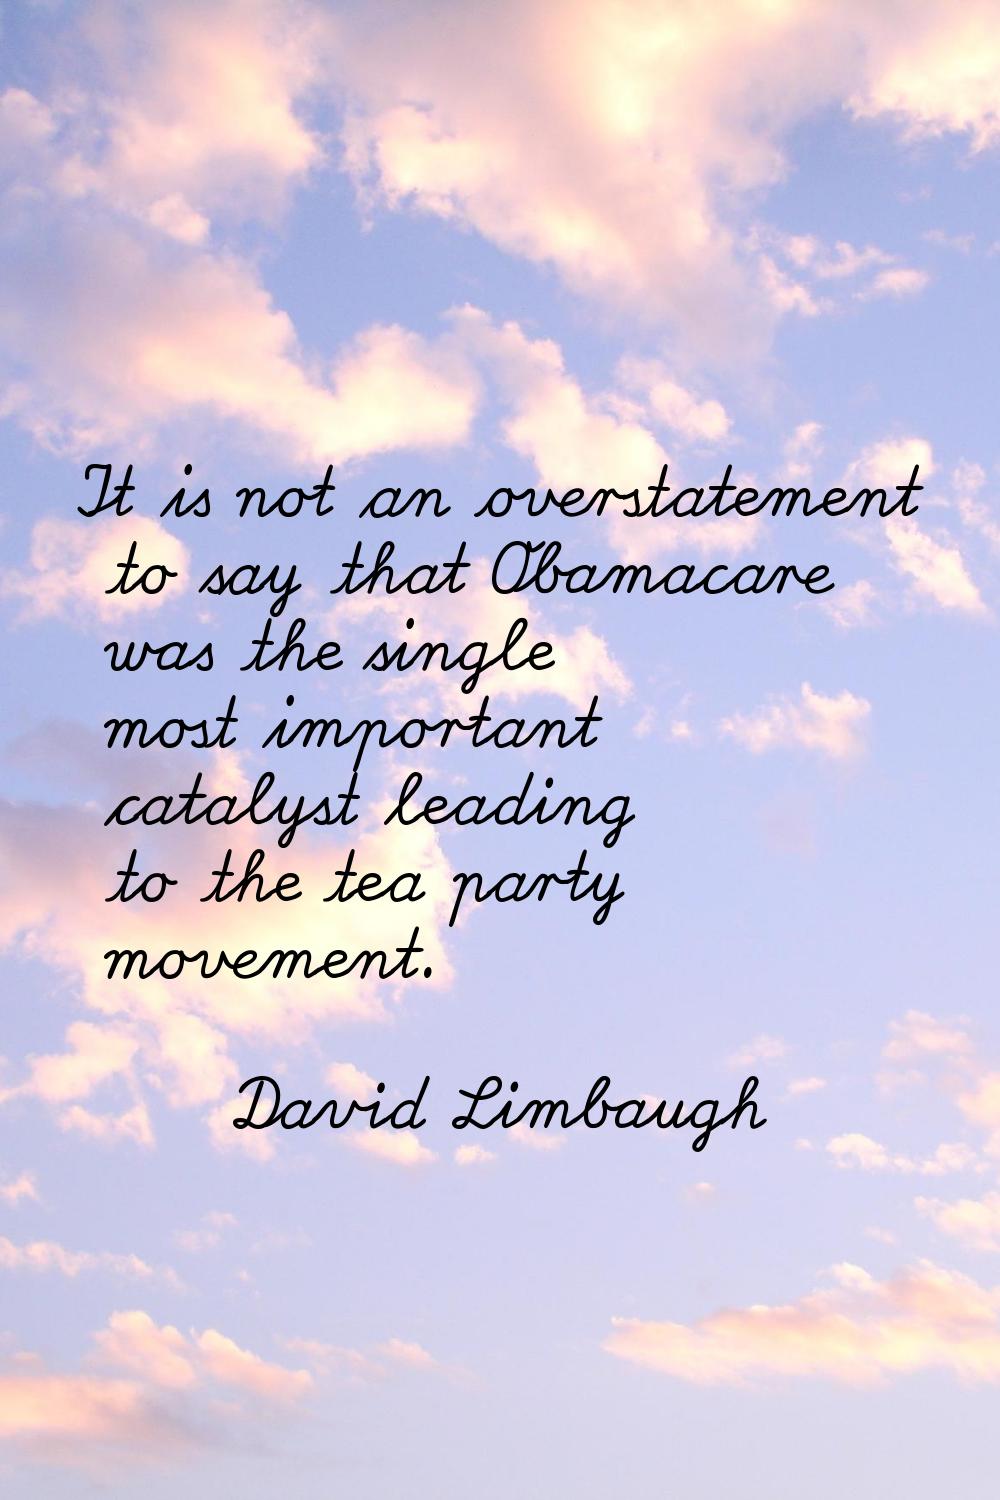 It is not an overstatement to say that Obamacare was the single most important catalyst leading to 